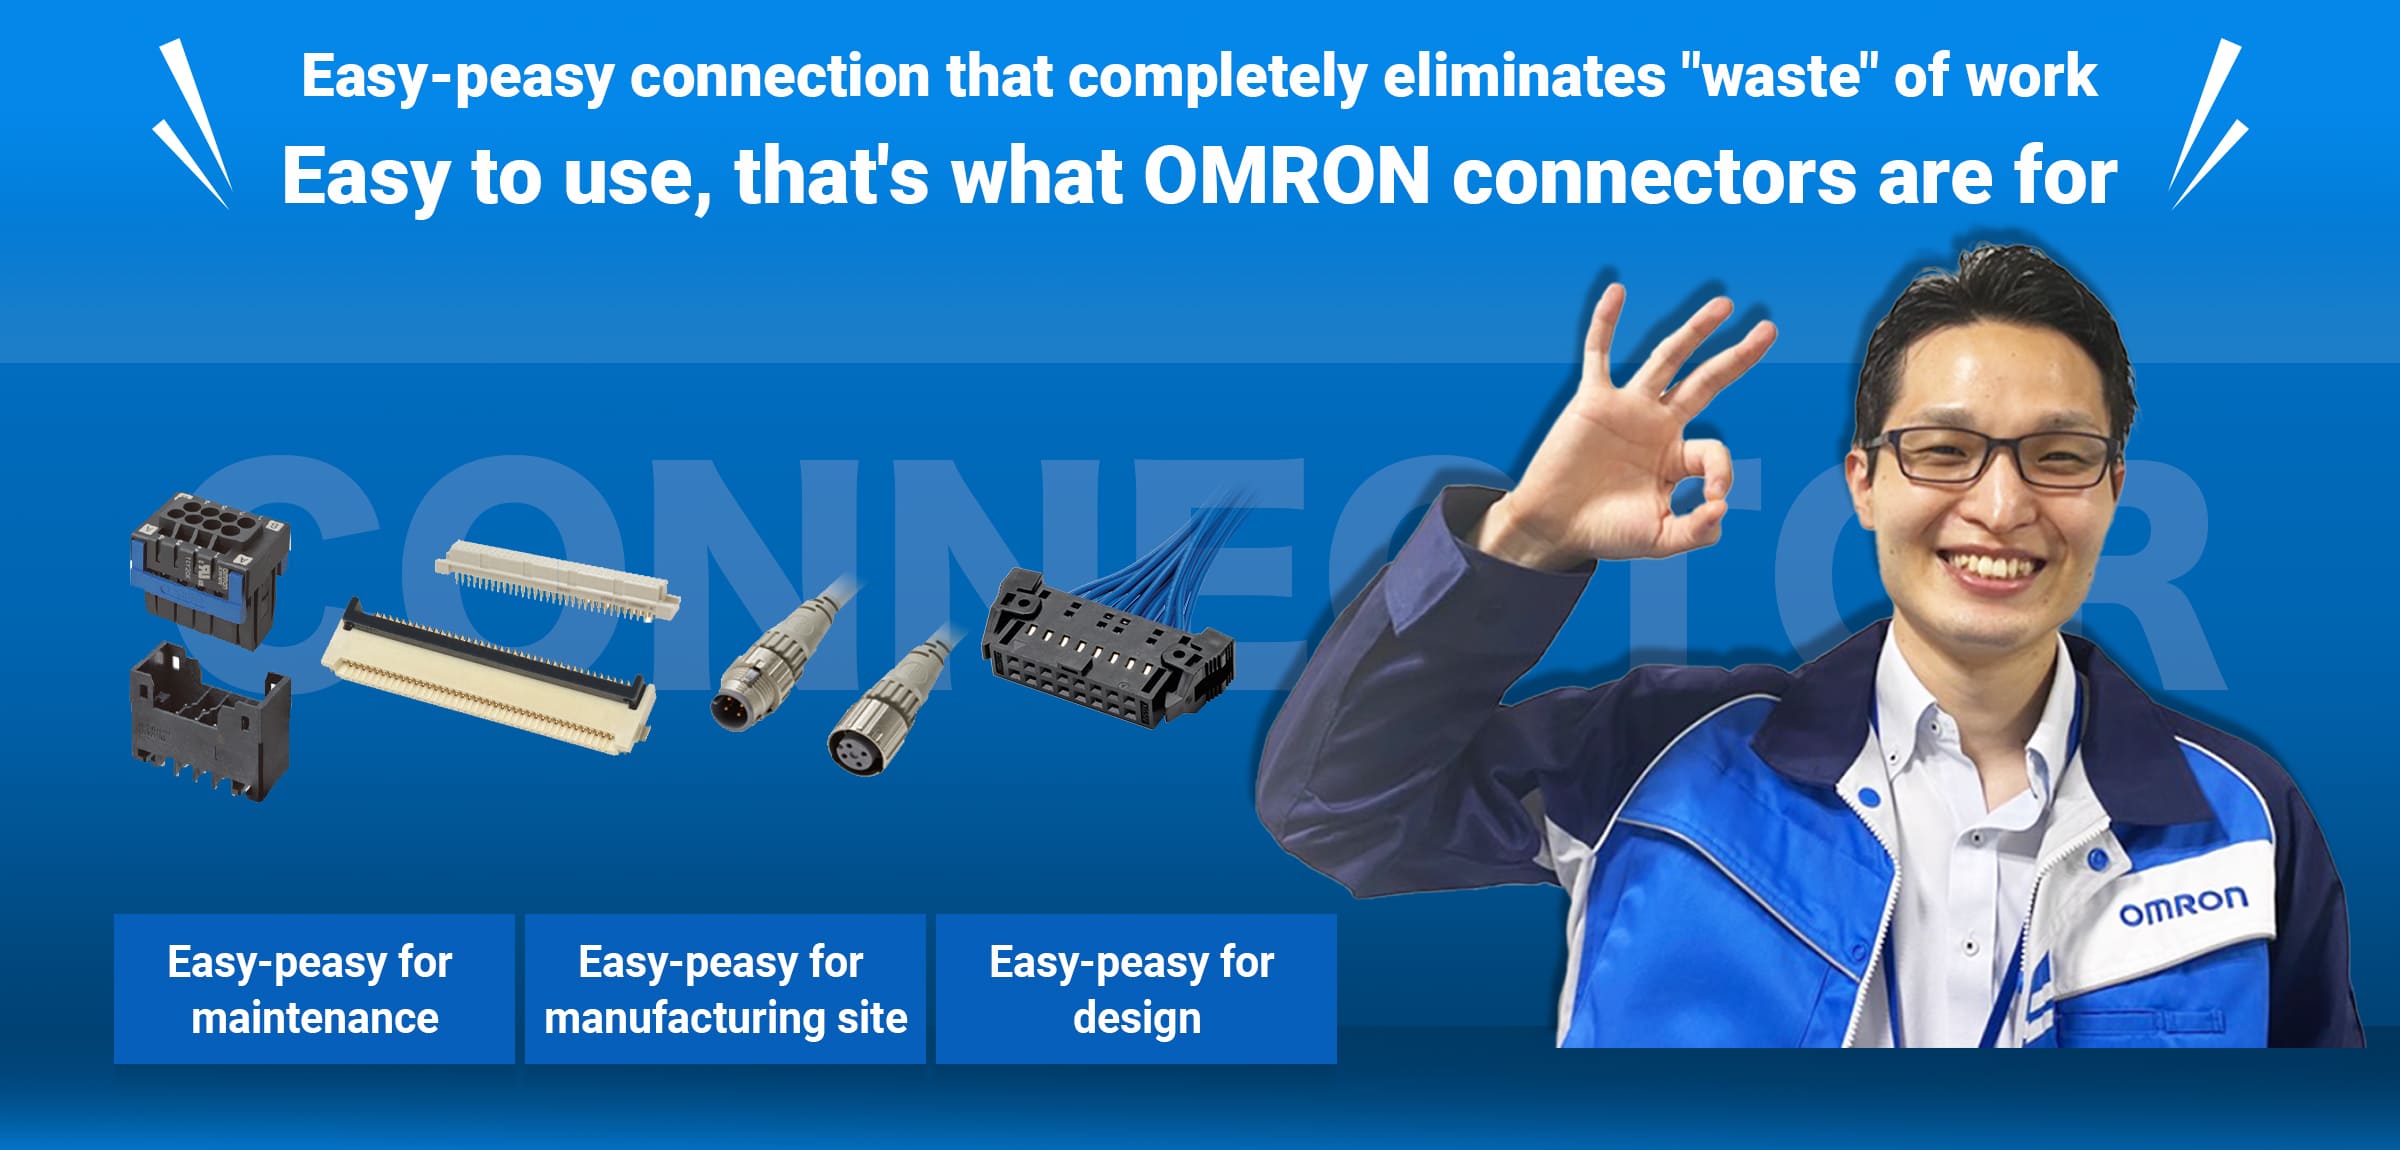 Easy-peasy connection that completely eliminates "waste" of work Easy to use, that's what OMRON connectors are for Easy-peasy for  maintenance, Easy-peasy for manufacturing site, Easy-peasy for design